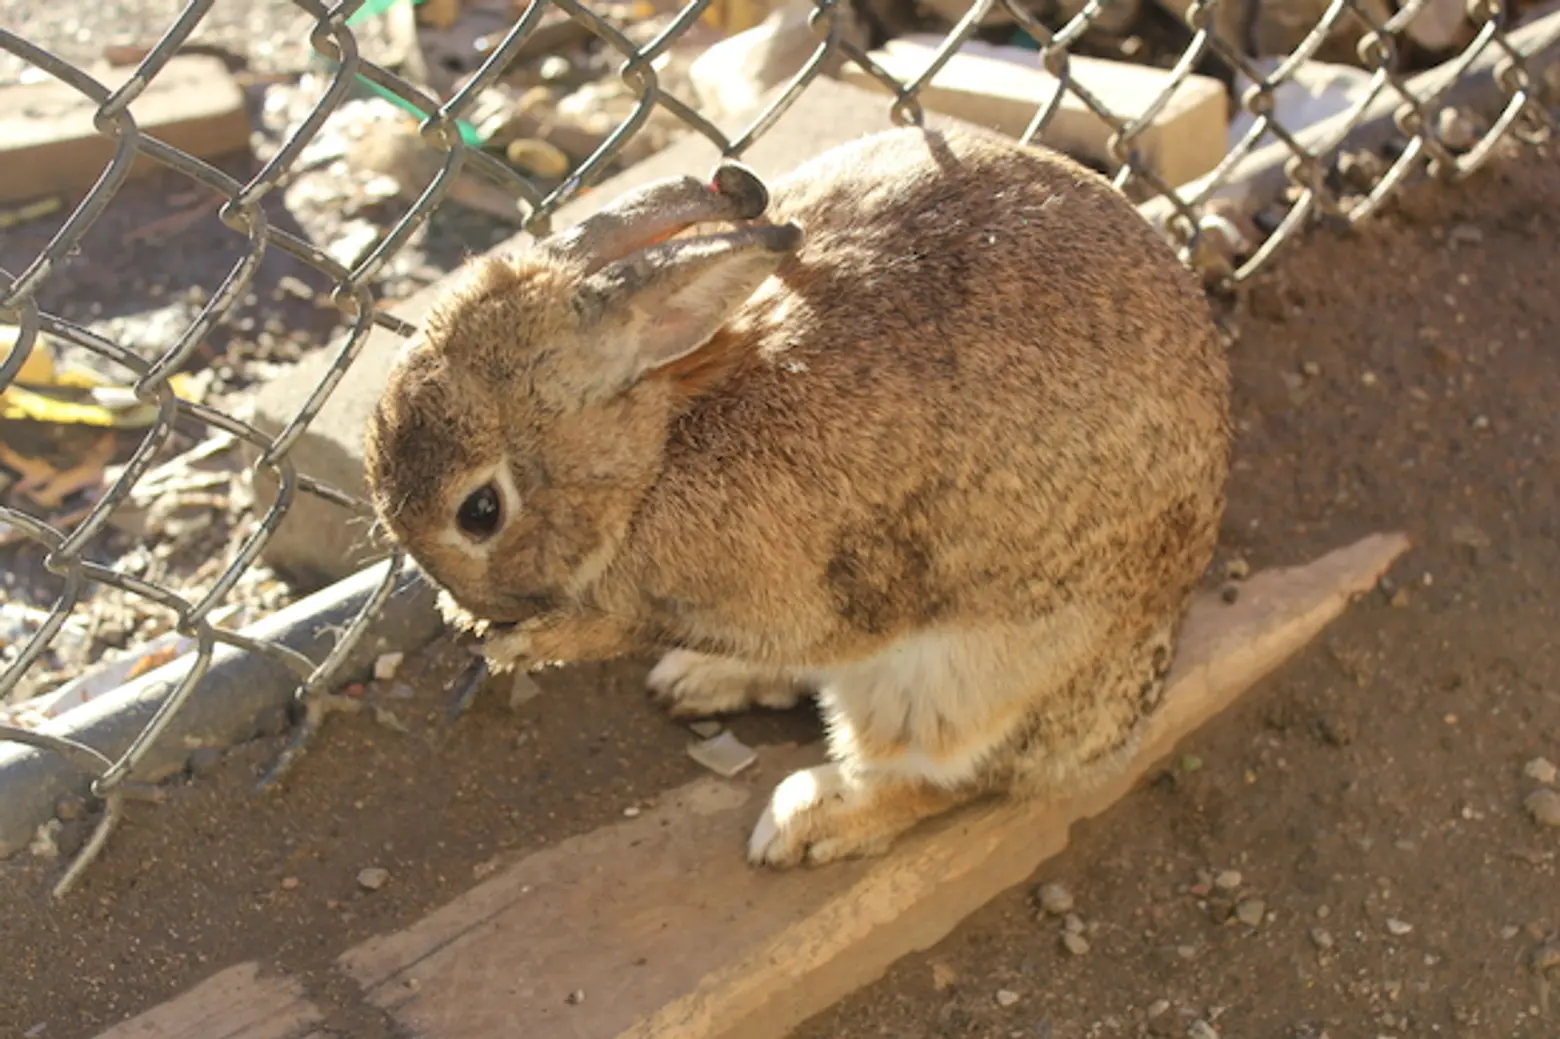 Daily Link Fix: “Possibly Carnivorous” Rabbits in Gowanus; Mastering the Eat-and-Walk